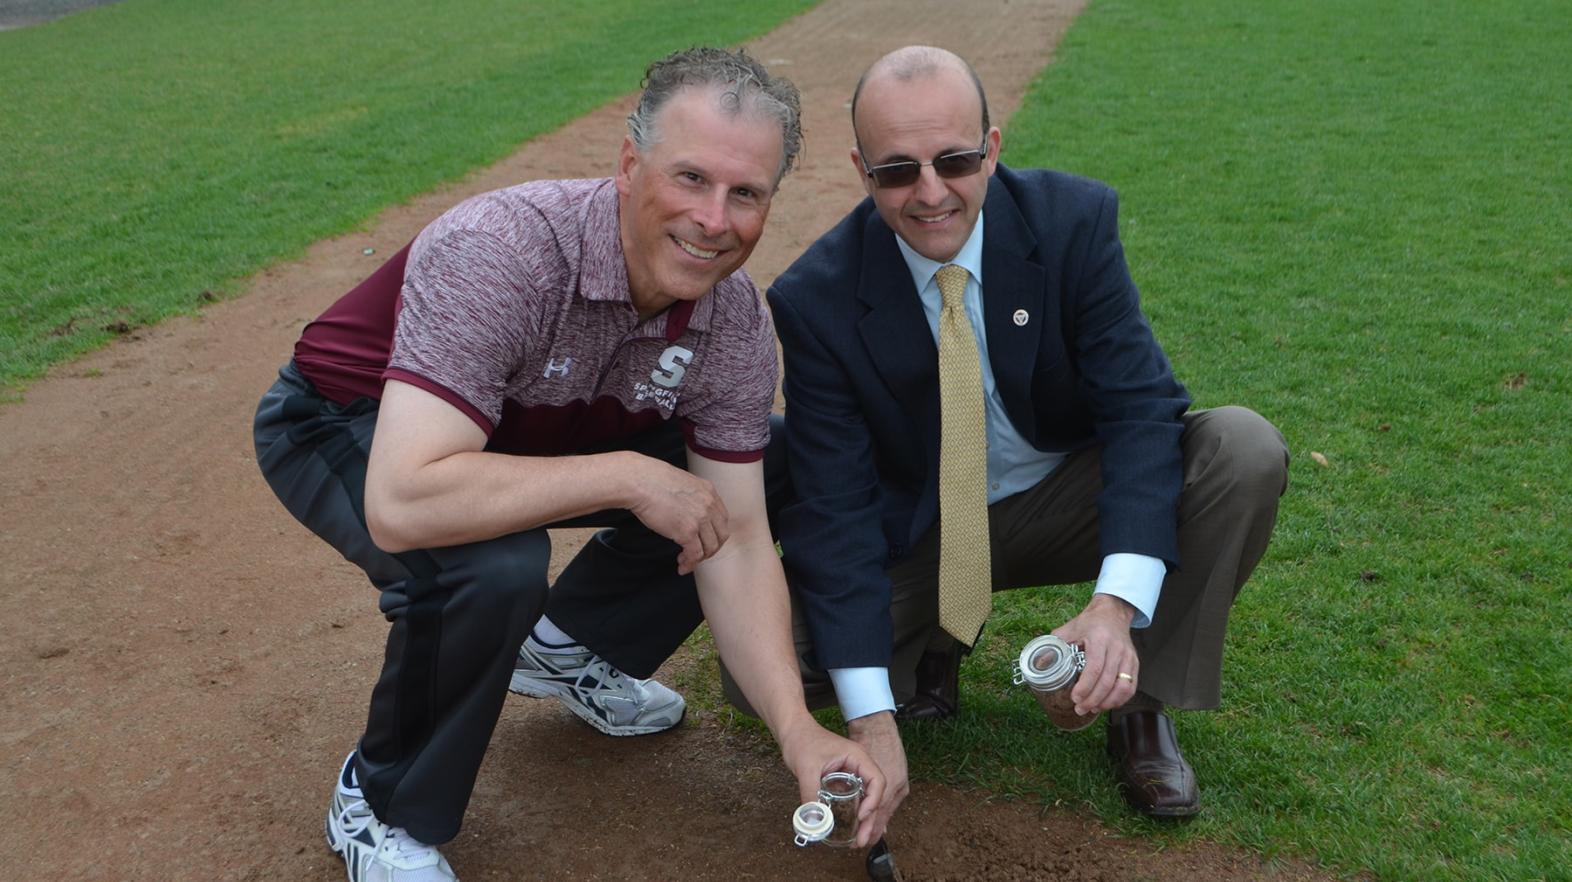 Dr. Poisson and Coach Simeone take a little bit of Berry-Alllen dirt with them before construction begins. 